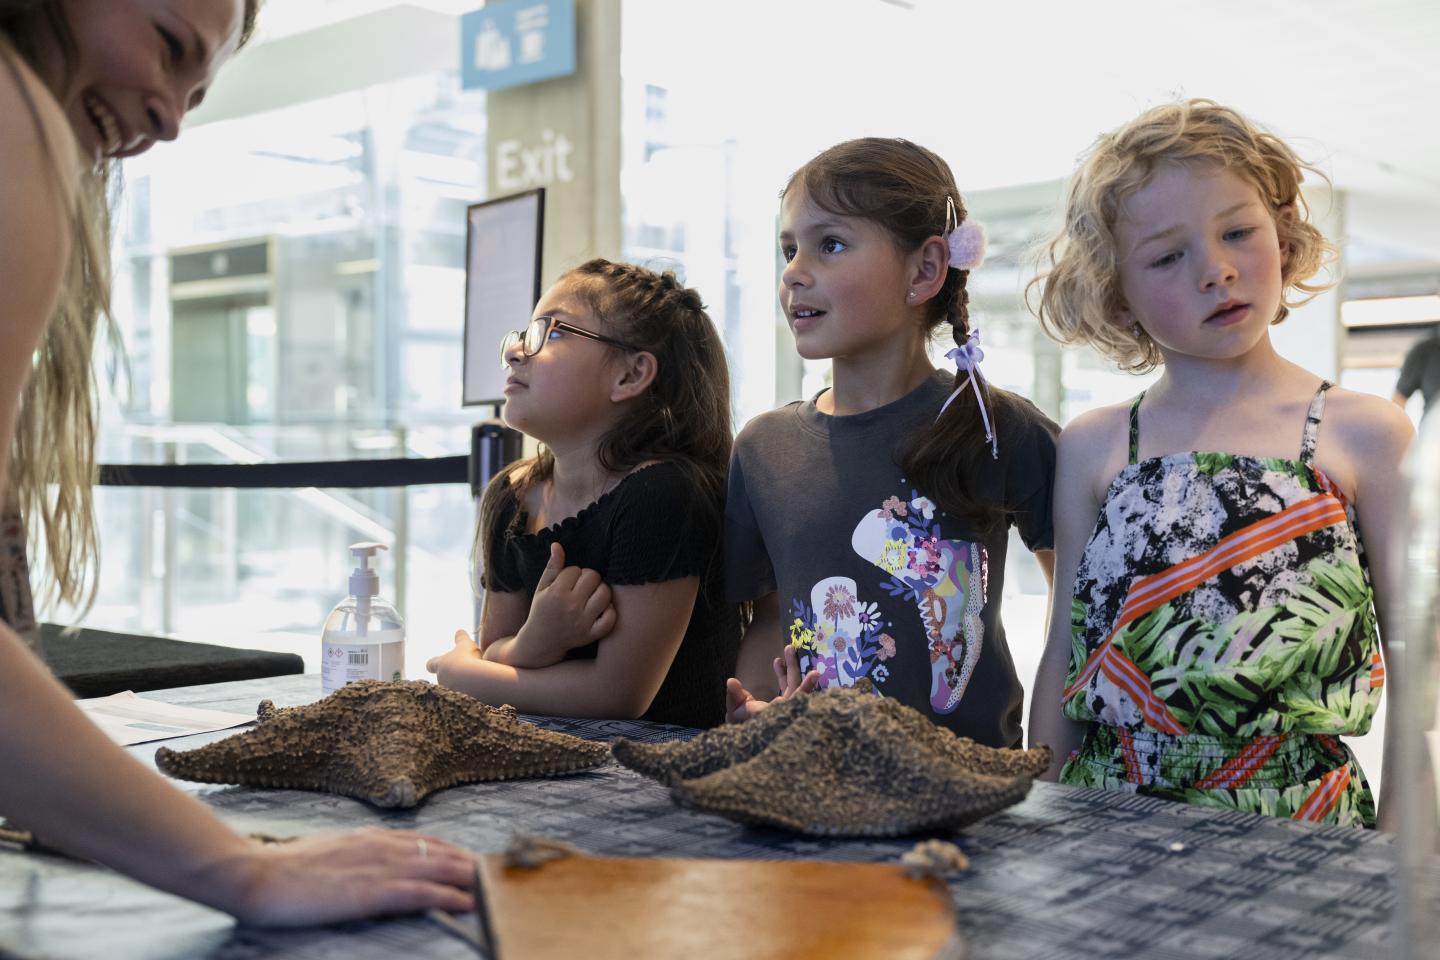 Three children take part in an object handling session at the National Maritime Museum